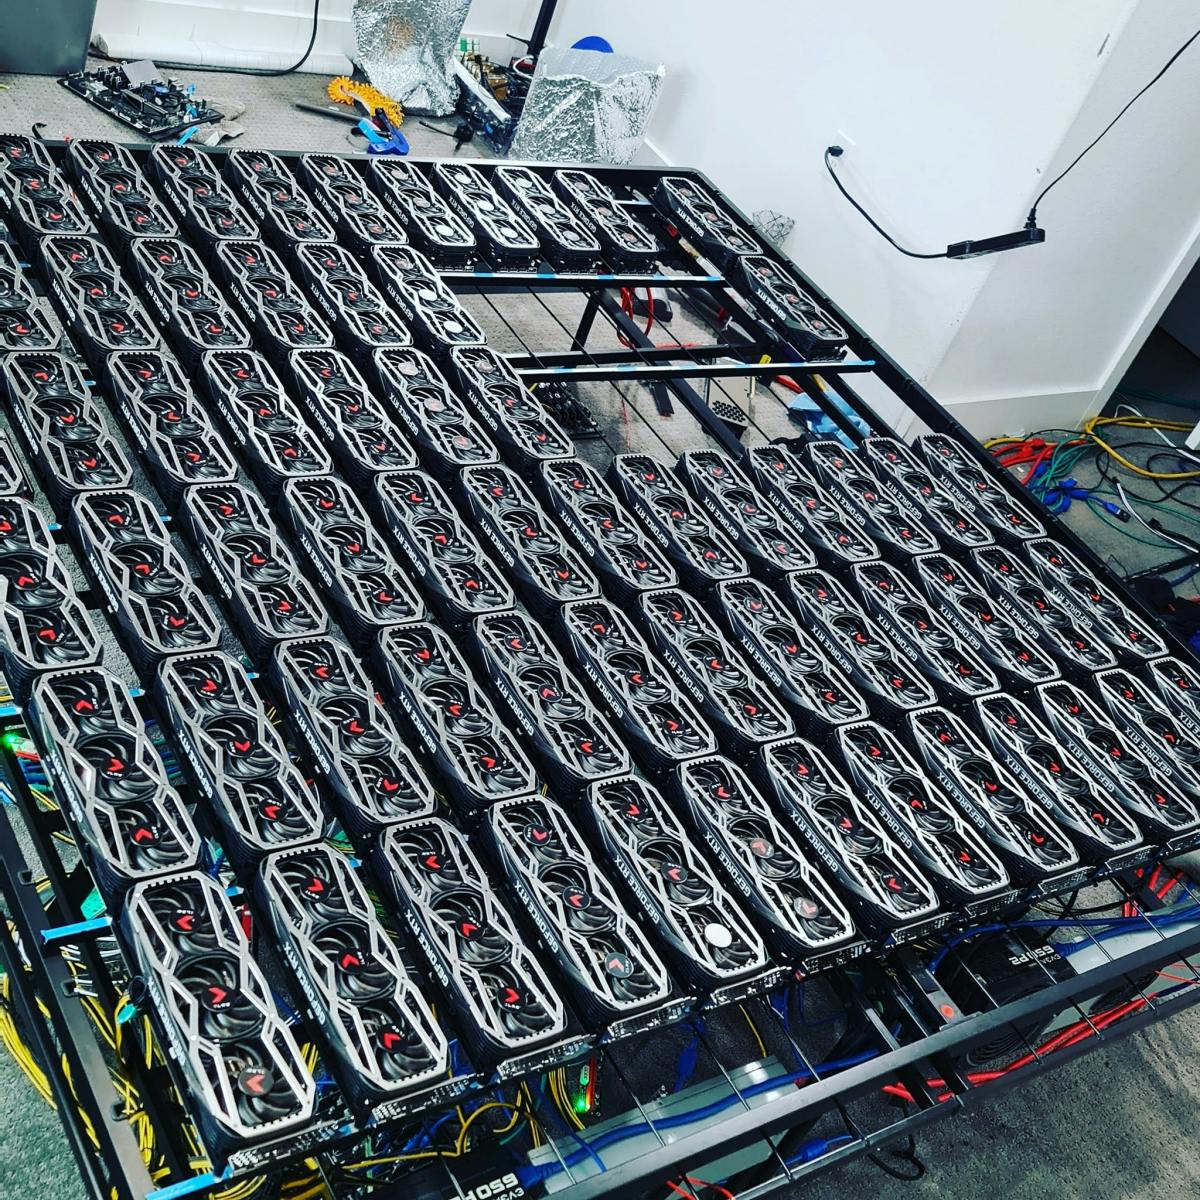 The Best Ethereum Mining Rig / Amazon Com Bscom Mining Rig 8 Gpu Complete Miner Rig Mining Machine System For Crypto Coin Currency Mining Gpu Miner Including Motherboard Without Gpu Cpu Ssd Ram Psu Case With Cooling Fans Computers - Ethereum mining hardware, ethereum mining software, is mining ethereum worth it, ethereum mining pool.